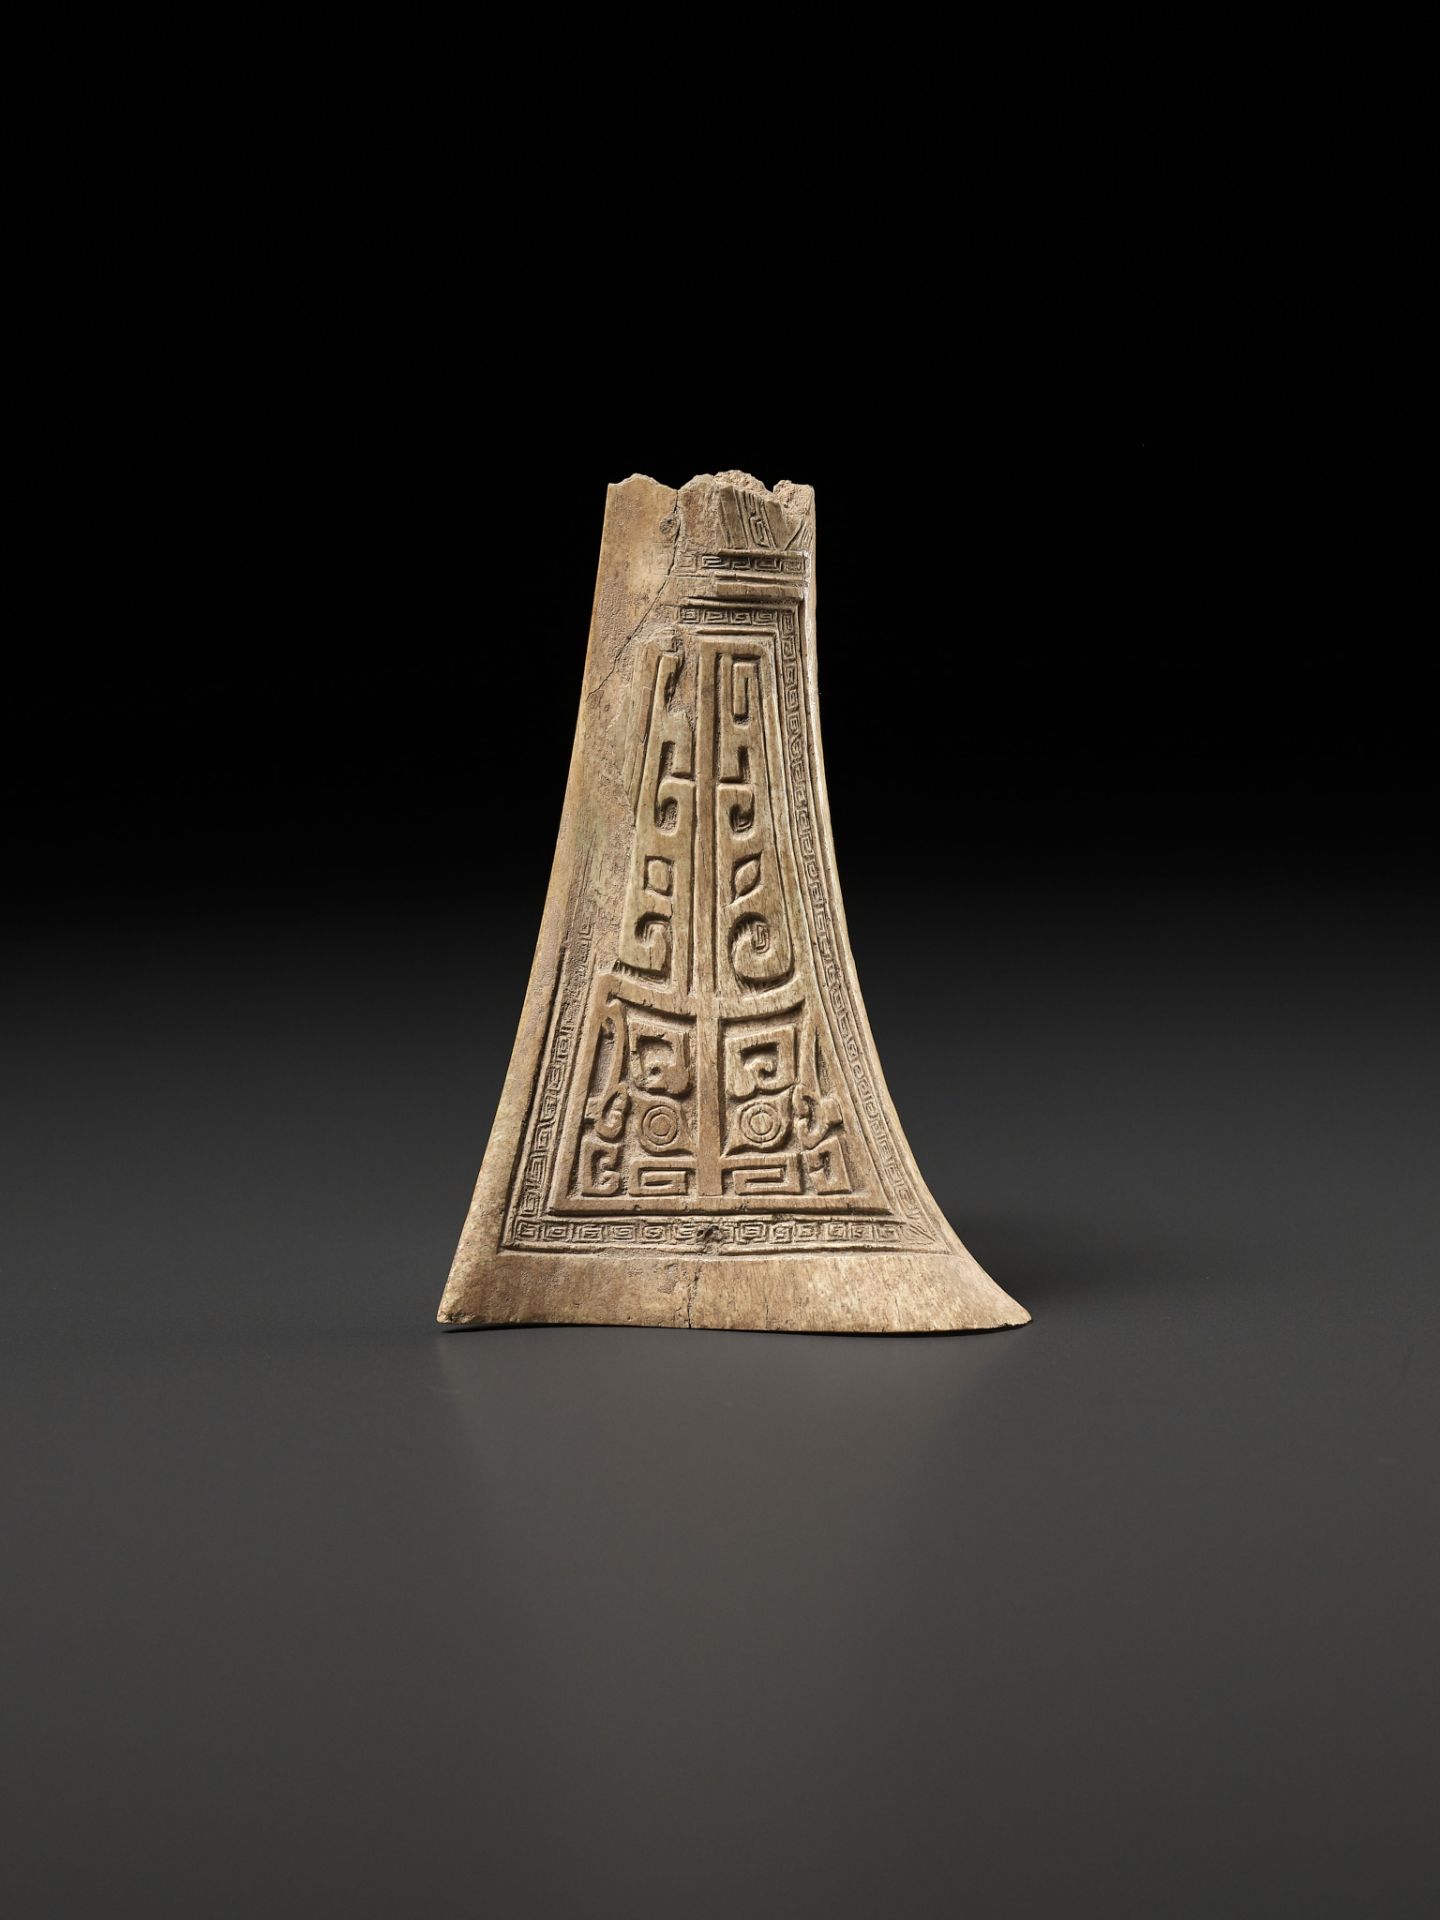 AN ARCHAIC CEREMONIAL BONE CARVING, SHANG DYNASTY - Image 3 of 16